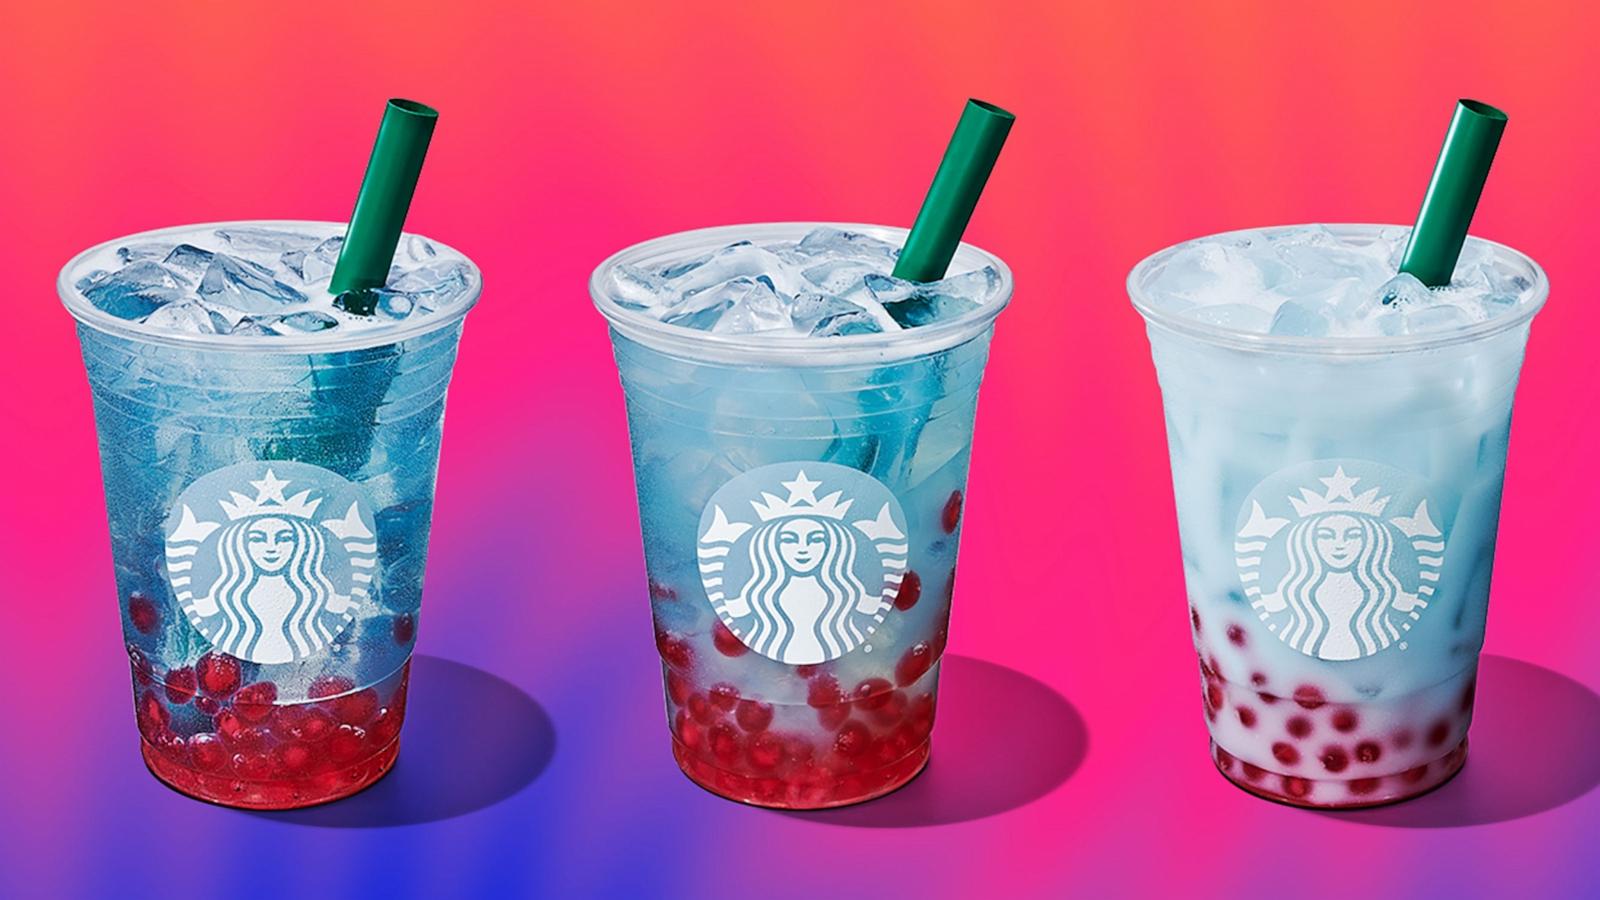 PHOTO: Starbucks unveiled its new Summer Berry Refresher drink.